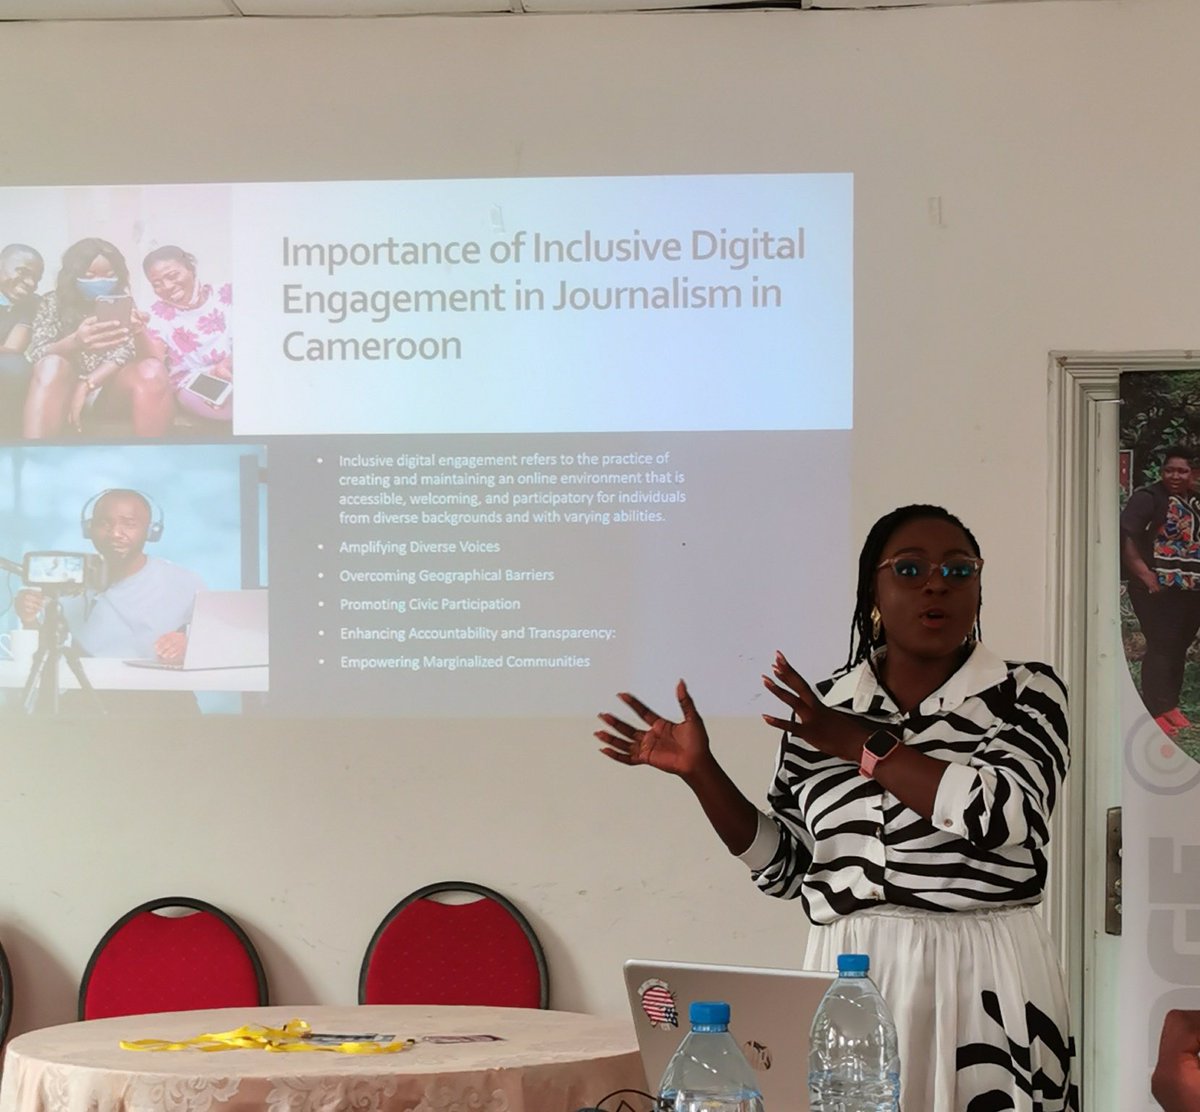 Joining several journalists and other stakeholders to gain knowledge and skills on Building Respect through Inclusive Digital Engagement and combating hate speech on and offline. @SwissAmbYaounde
#DigitalInclusion
#BRIDGE
#DigitalEngagement
#AmplifyDiverseVoices